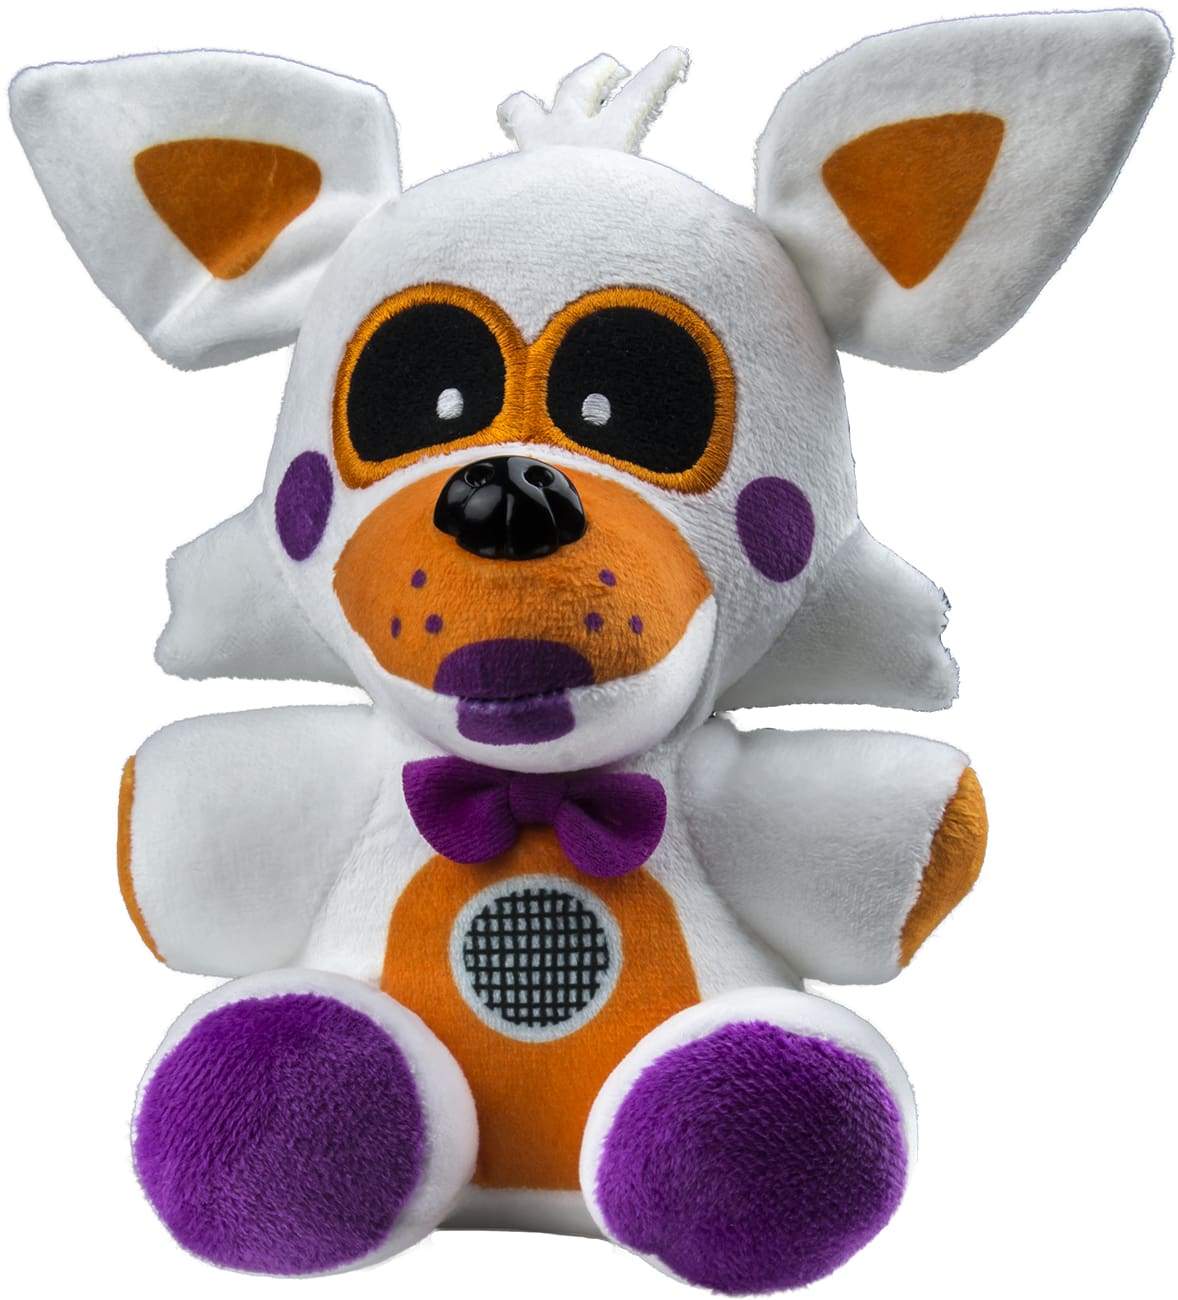 Can the FNaF Plushies please be put on the FNaF Wiki?